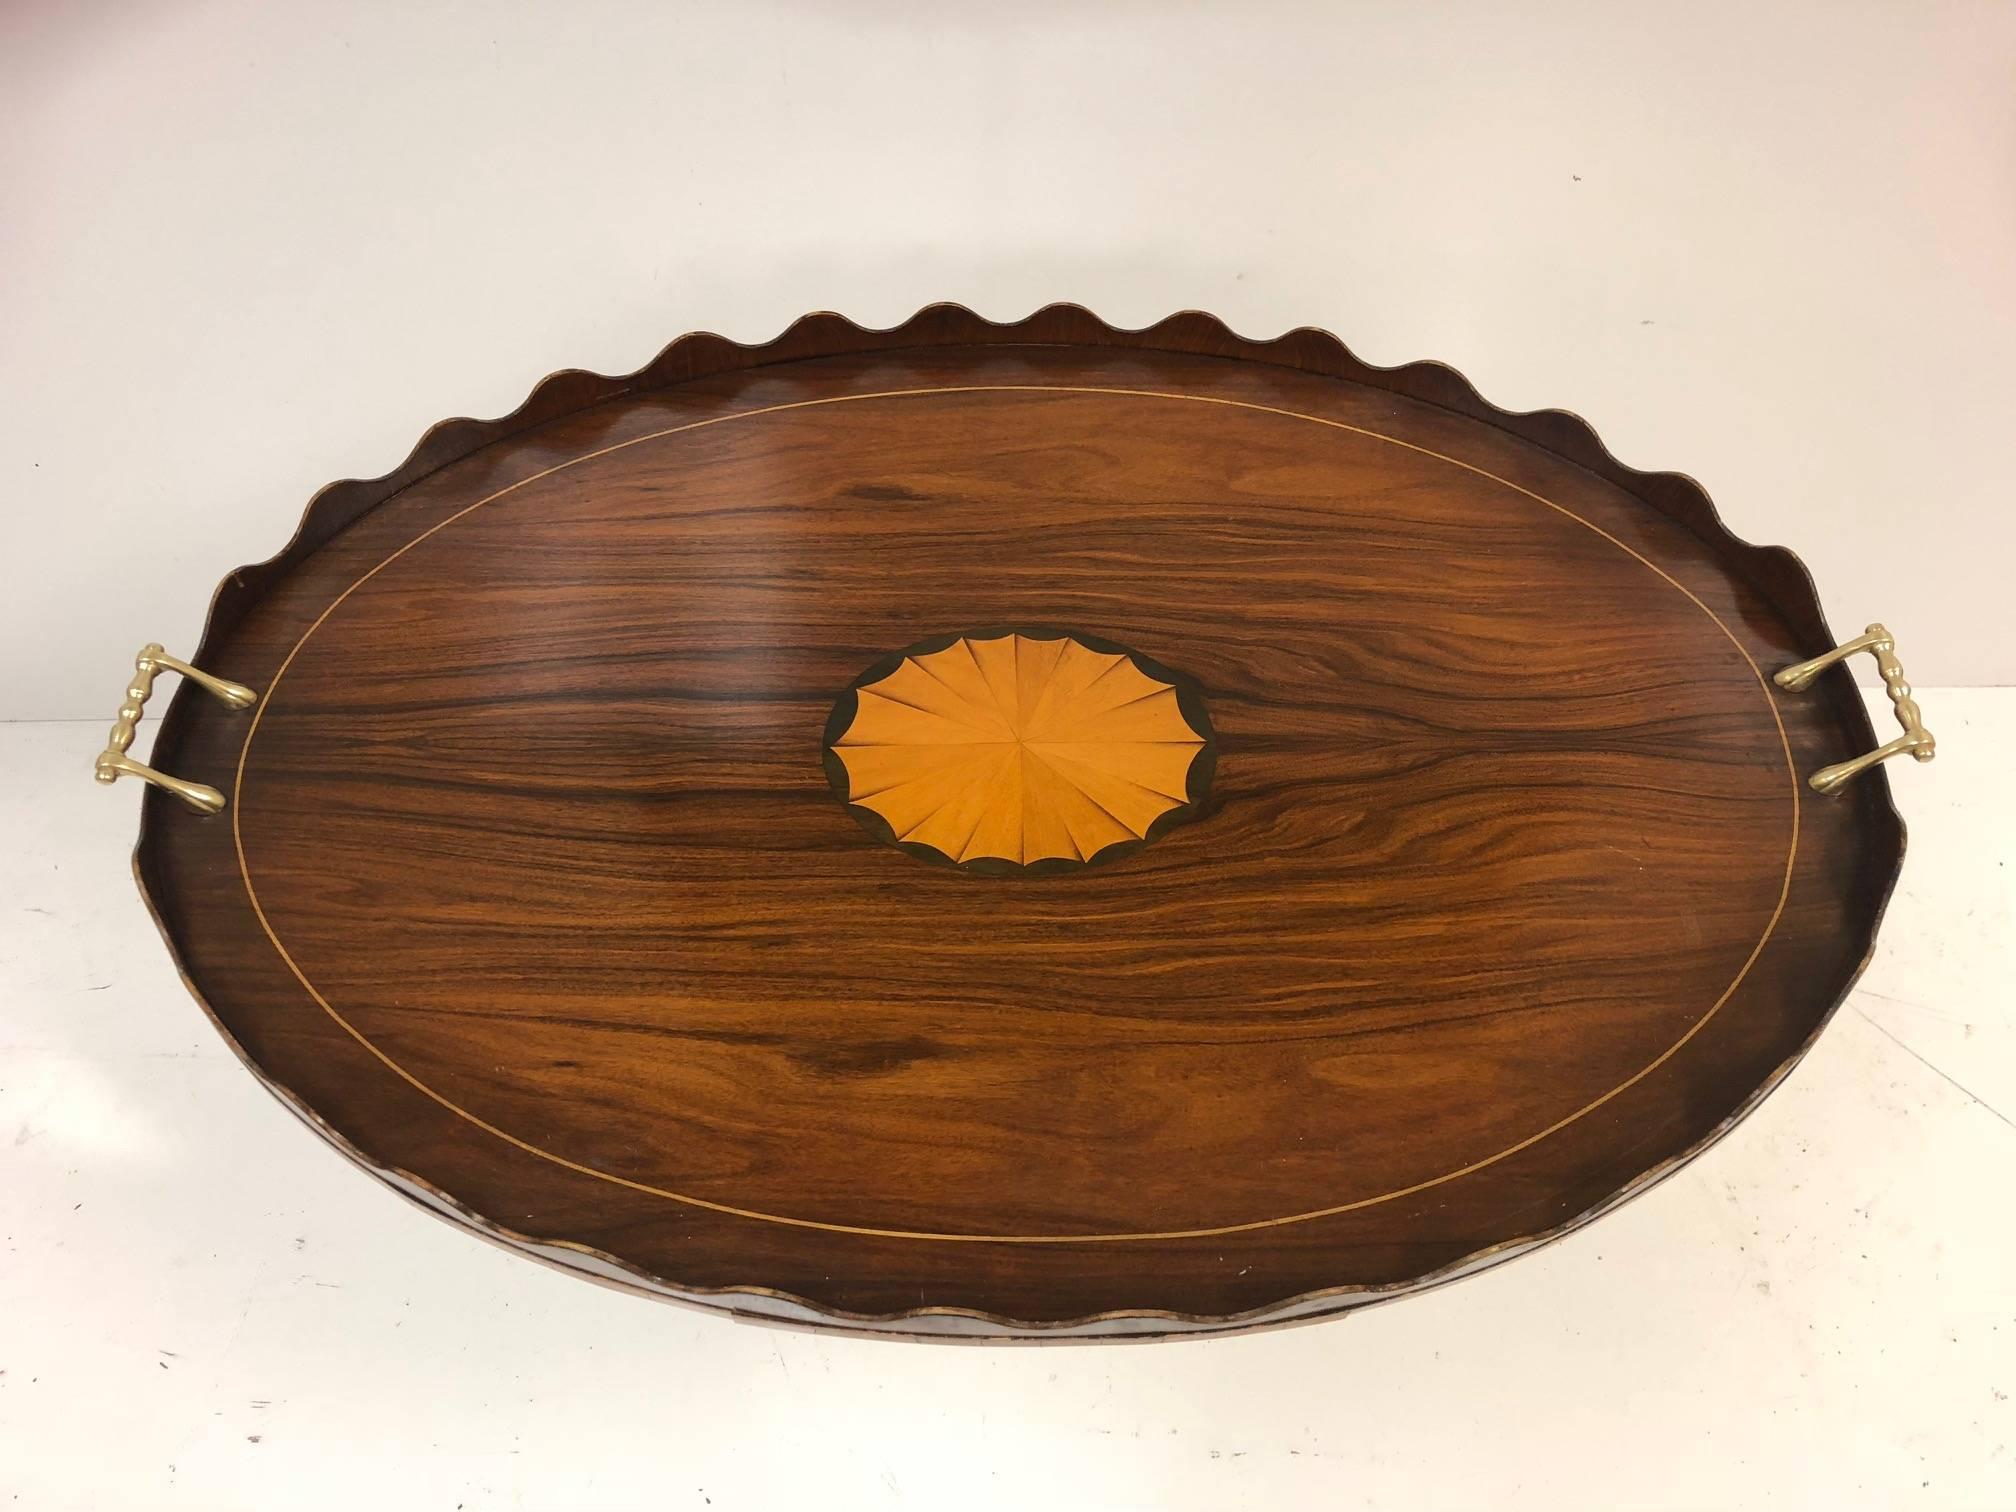 George III style rosewood and inlay serving tray. The tray has solid brass handles, satinwood inlay to the center and a scalloped edge.